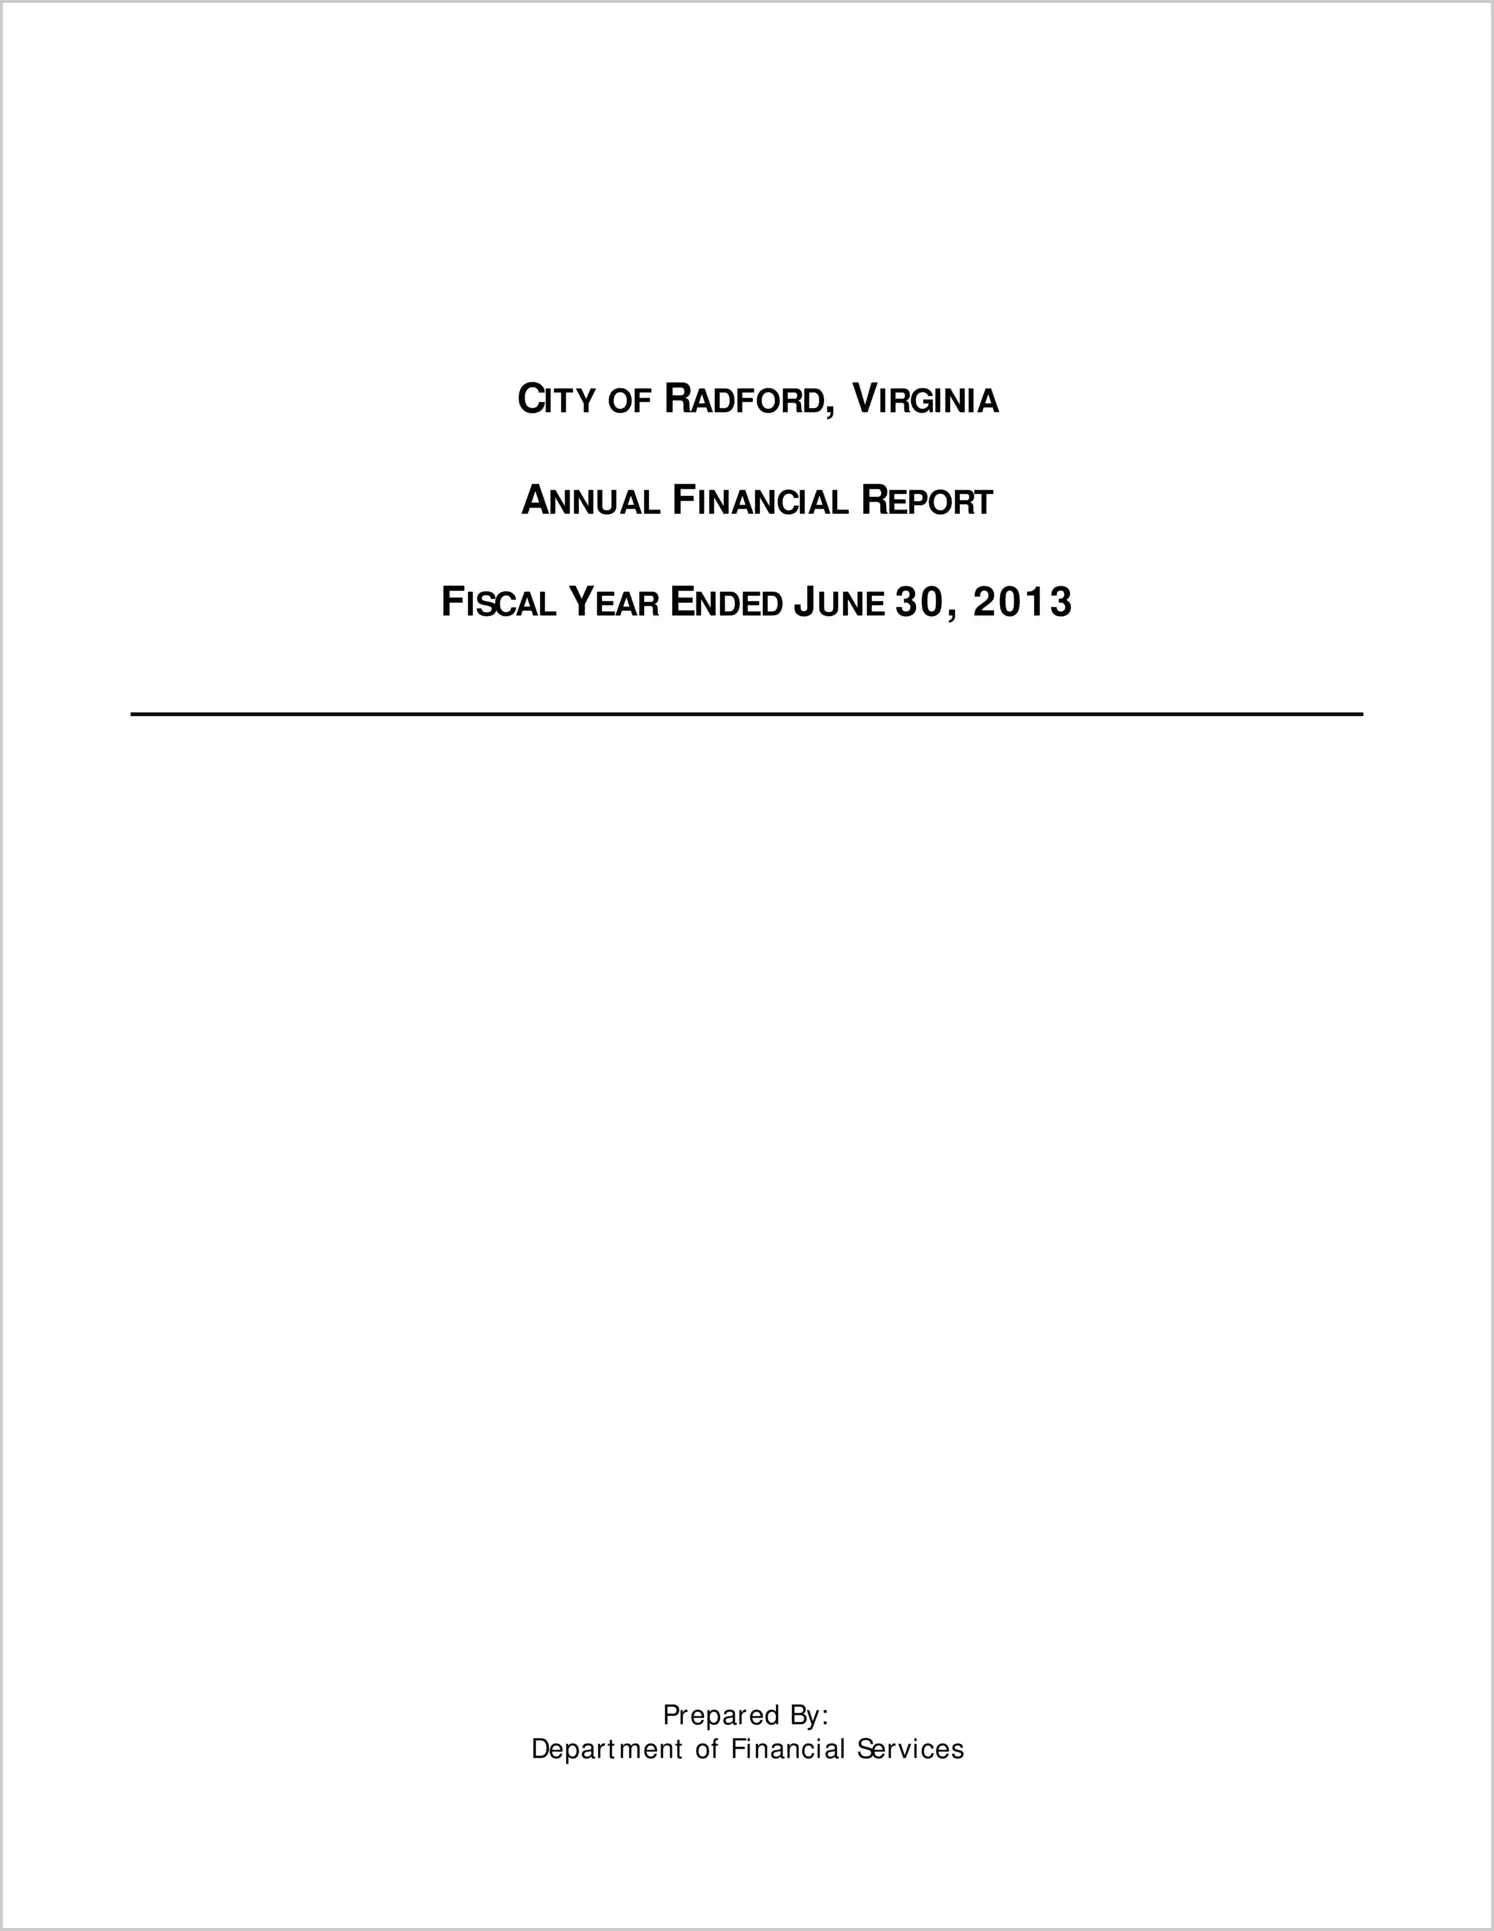 2013 Annual Financial Report for City of Radford